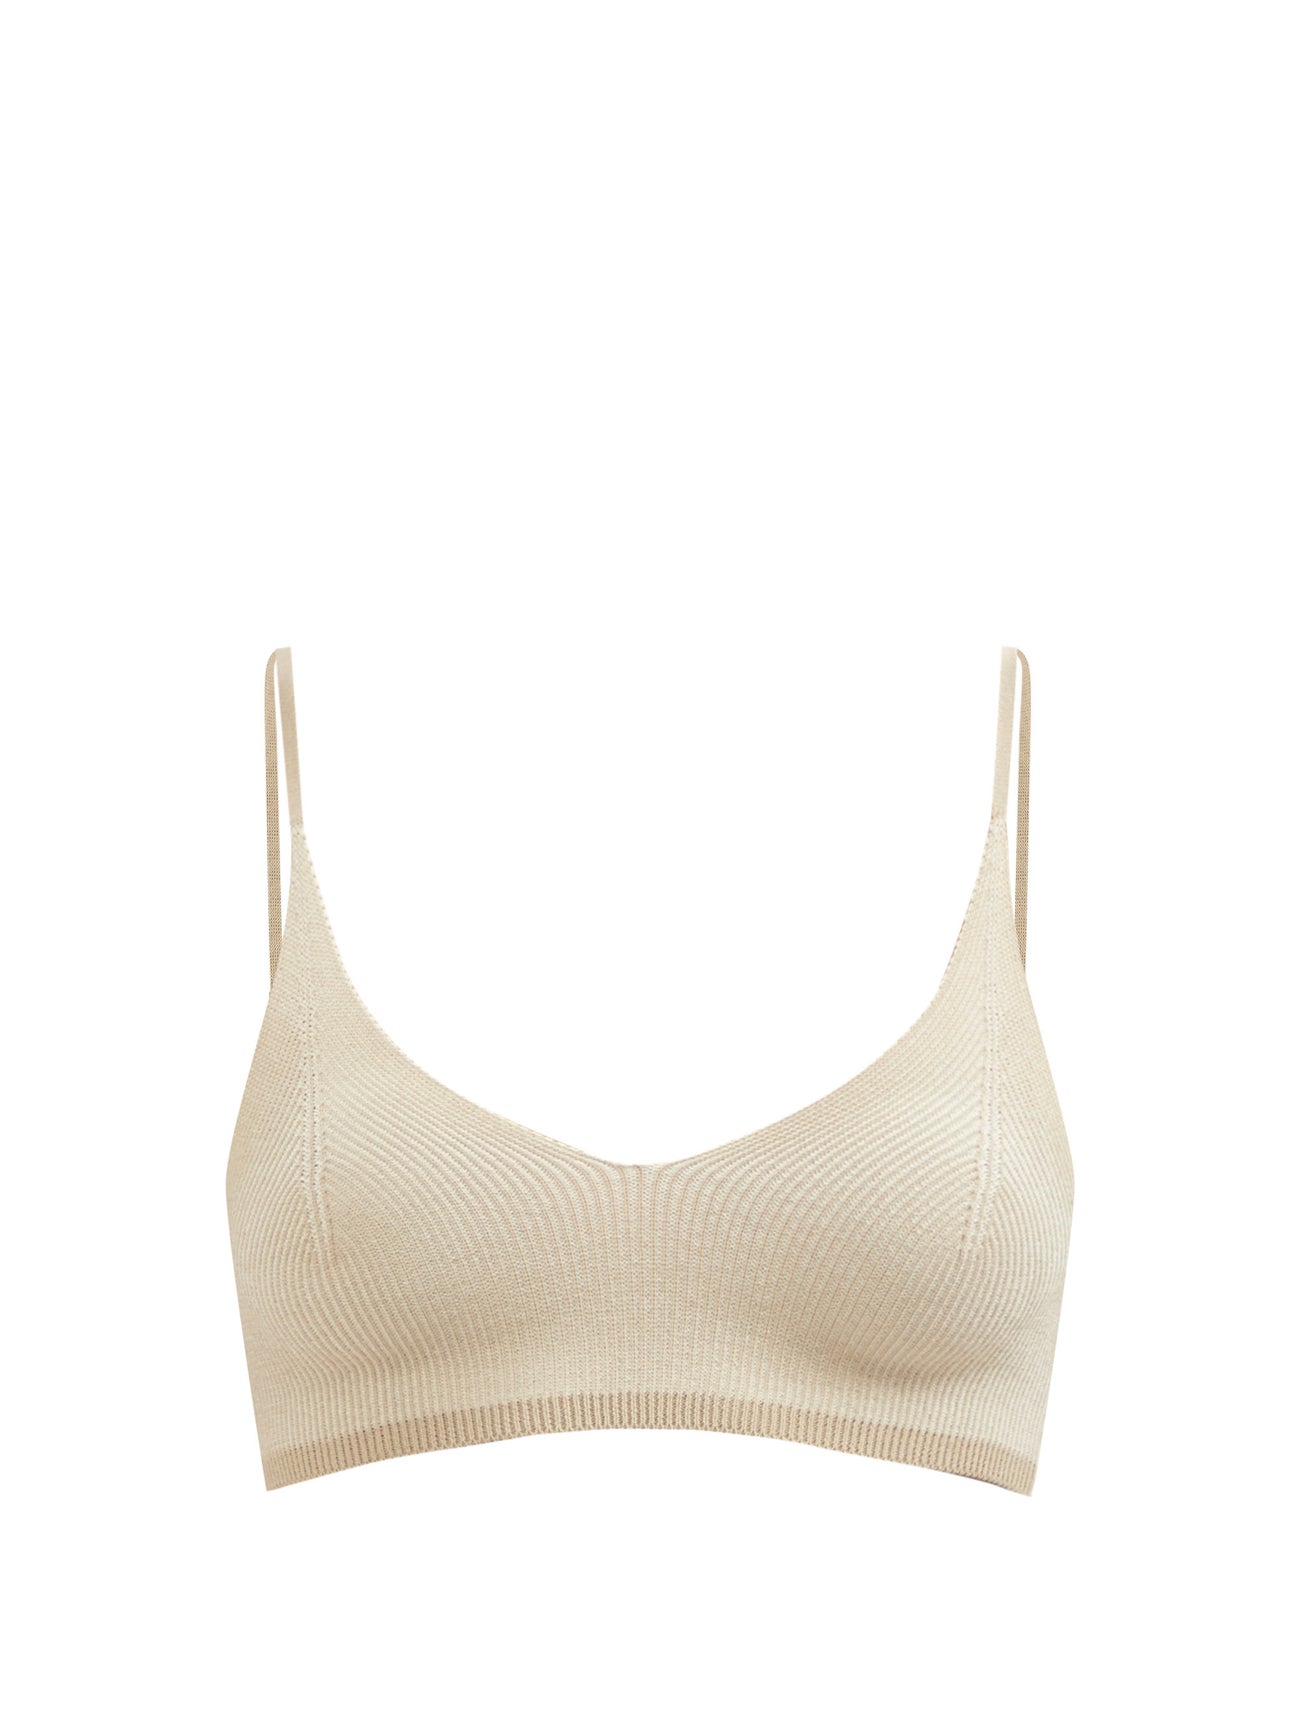 Jacquemus Valensole Ribbed Bralette